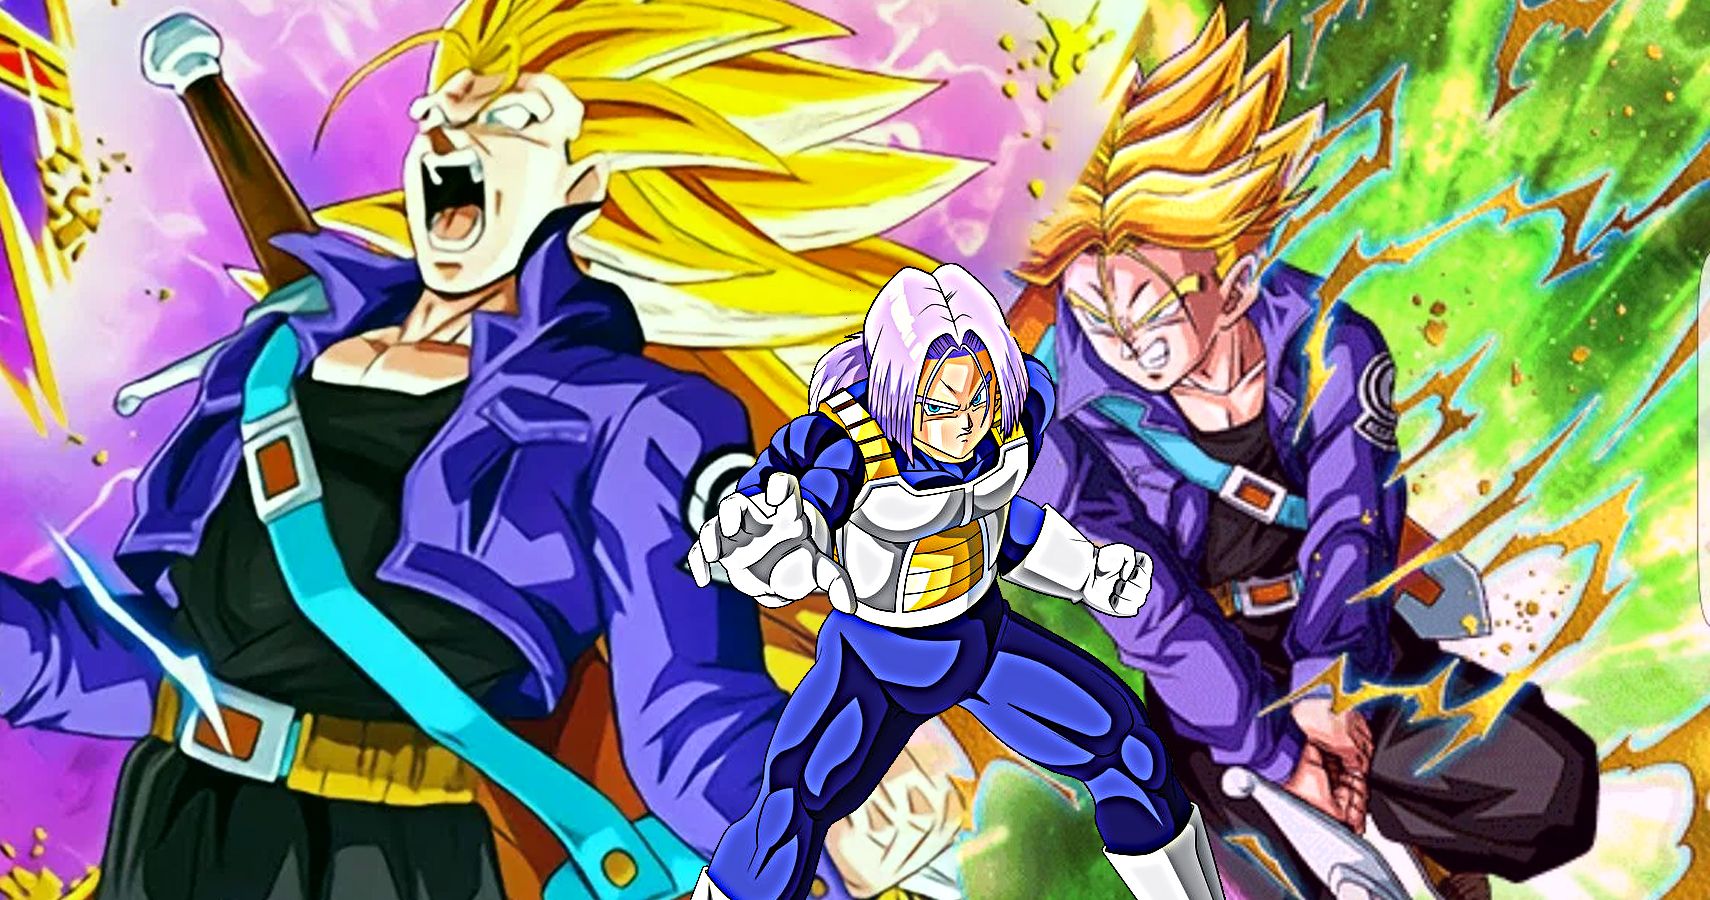 how old was trunks in gt